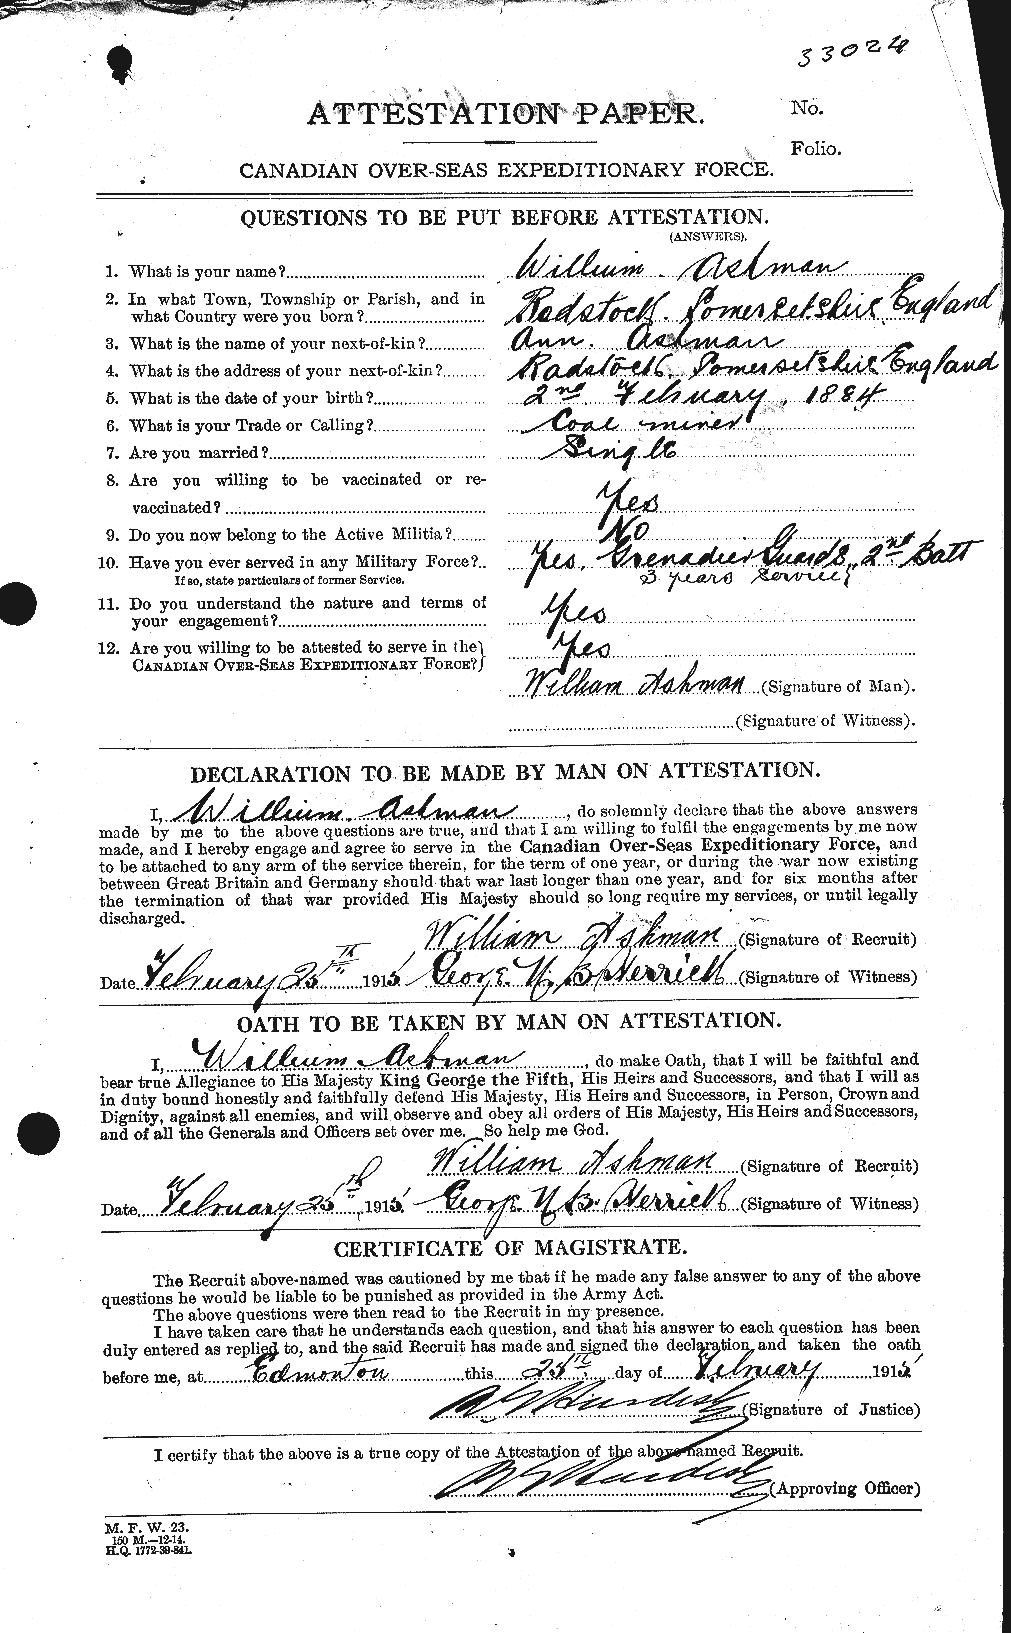 Personnel Records of the First World War - CEF 223135a